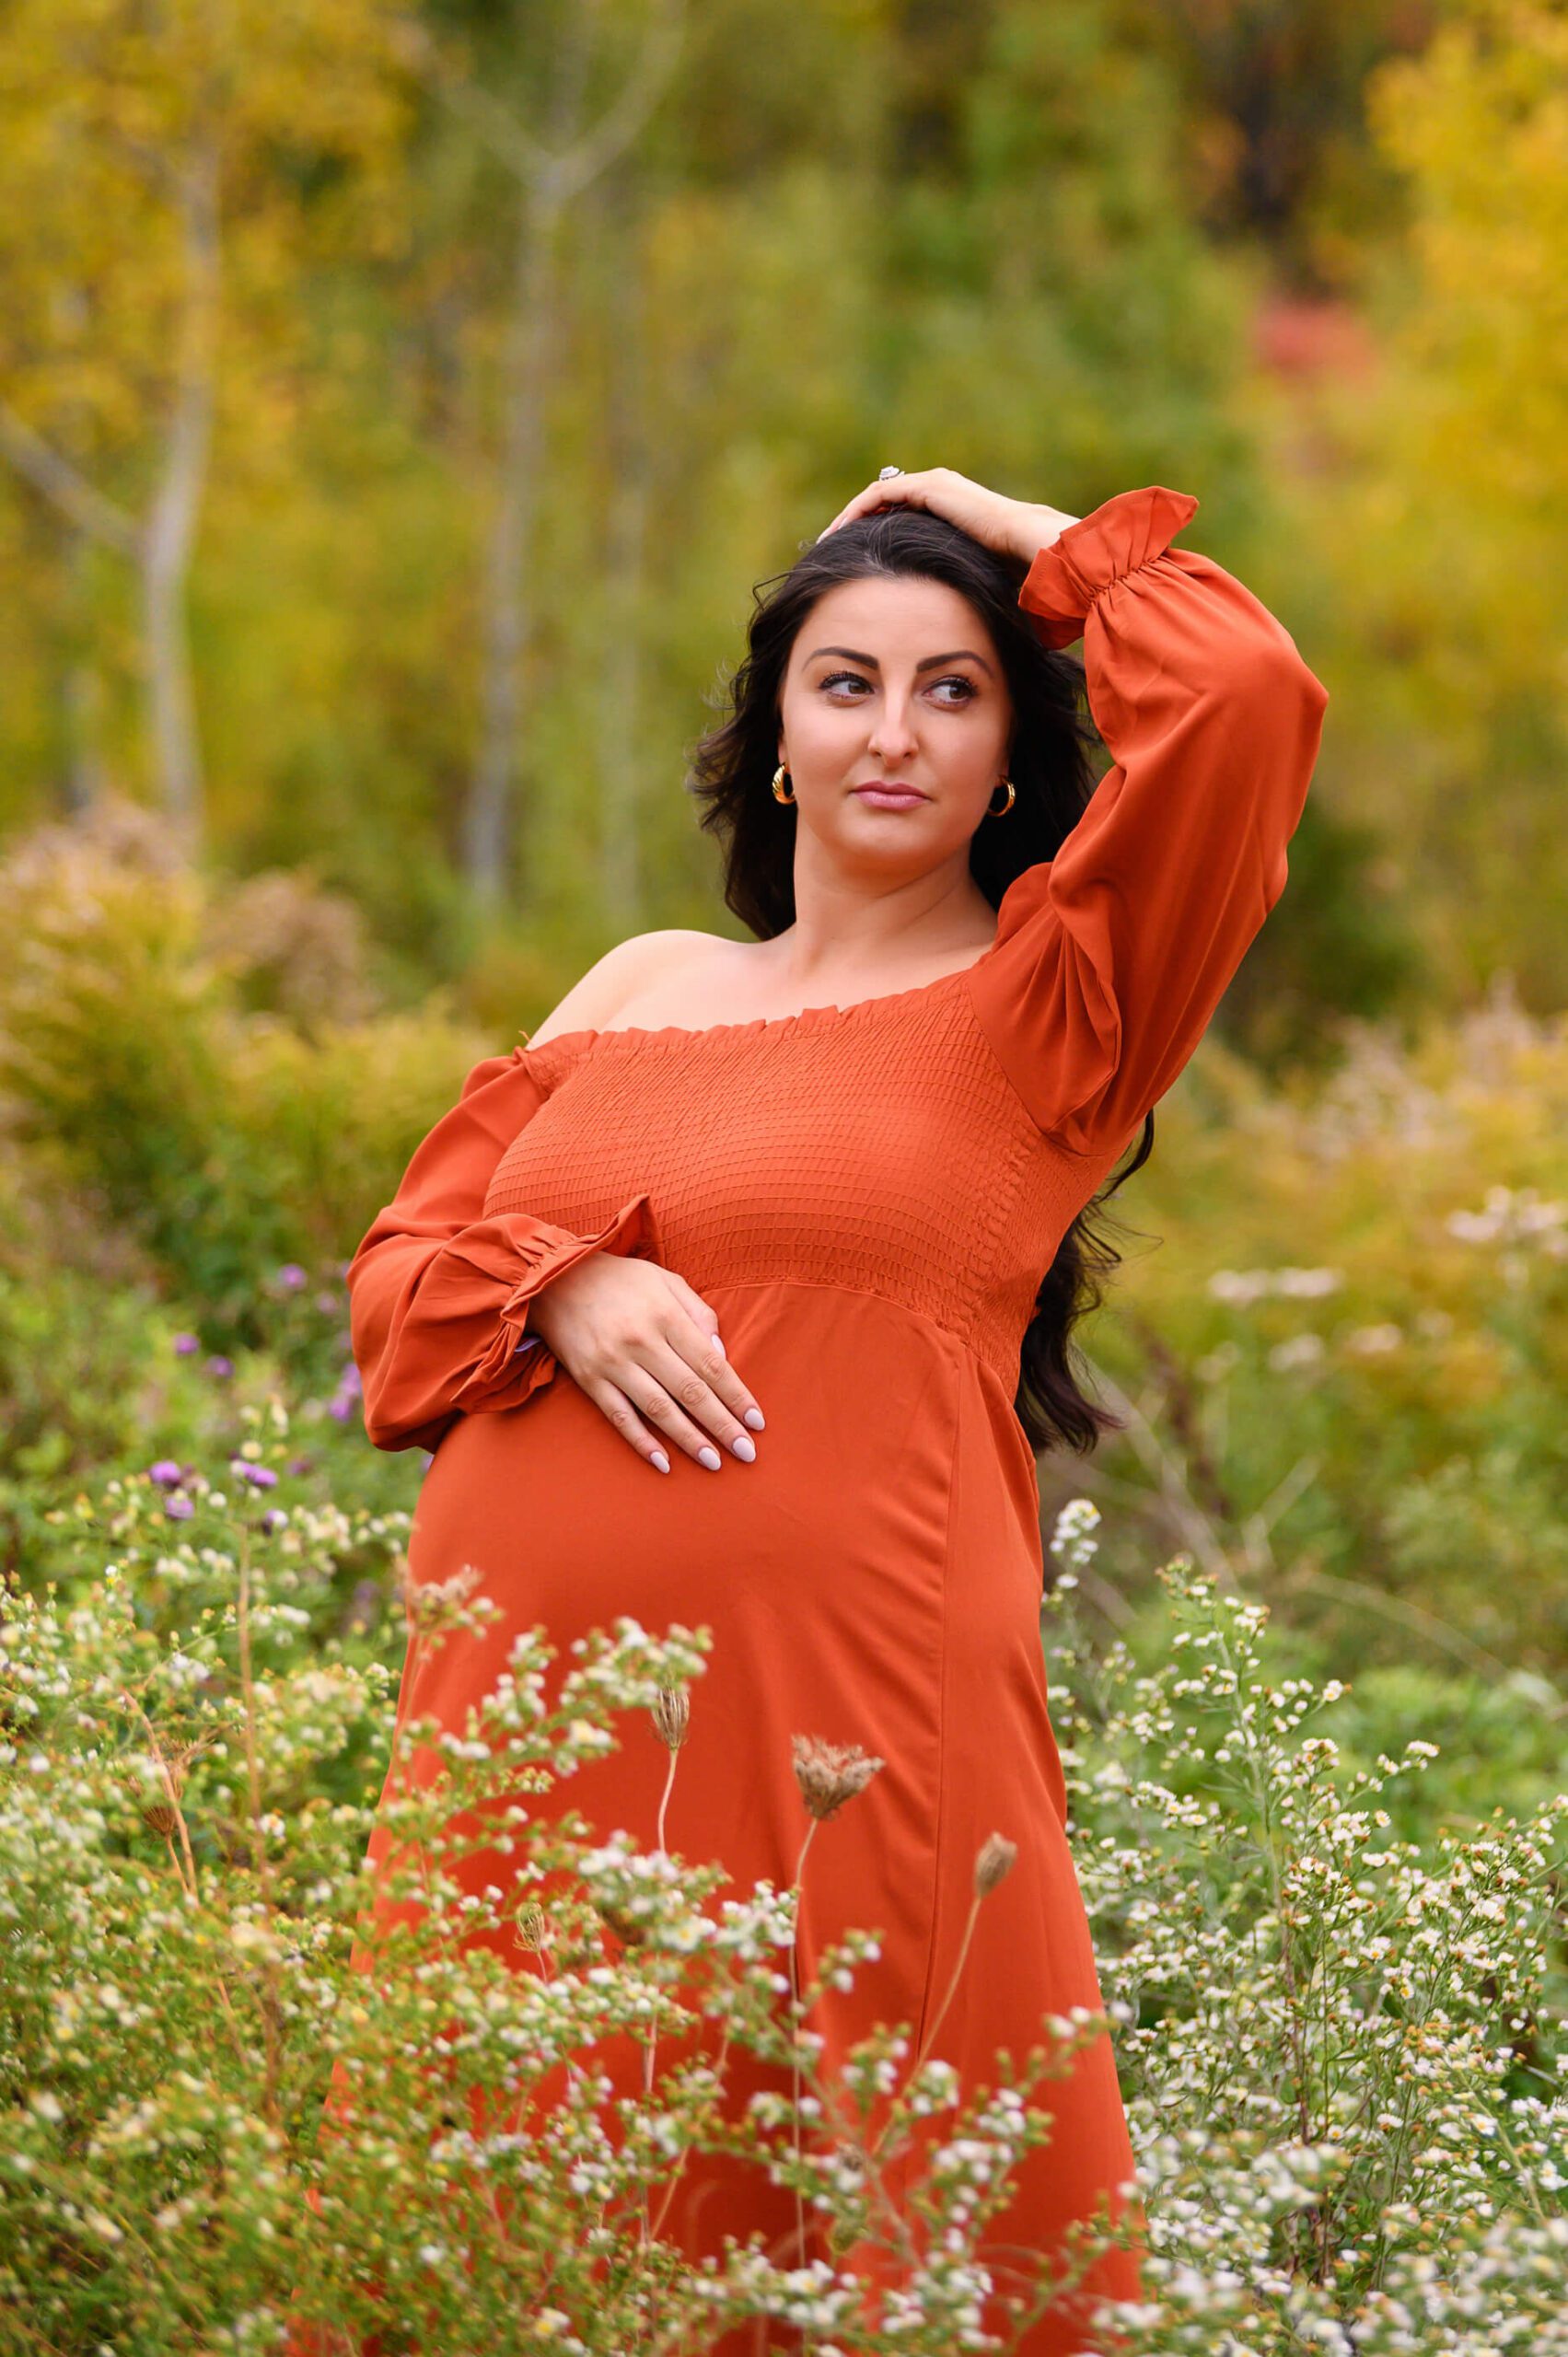 Toronto Maternity Photography Session. Mom is wearing an Orange dress wither her hand on her head looking off into the distance with fall foilage.